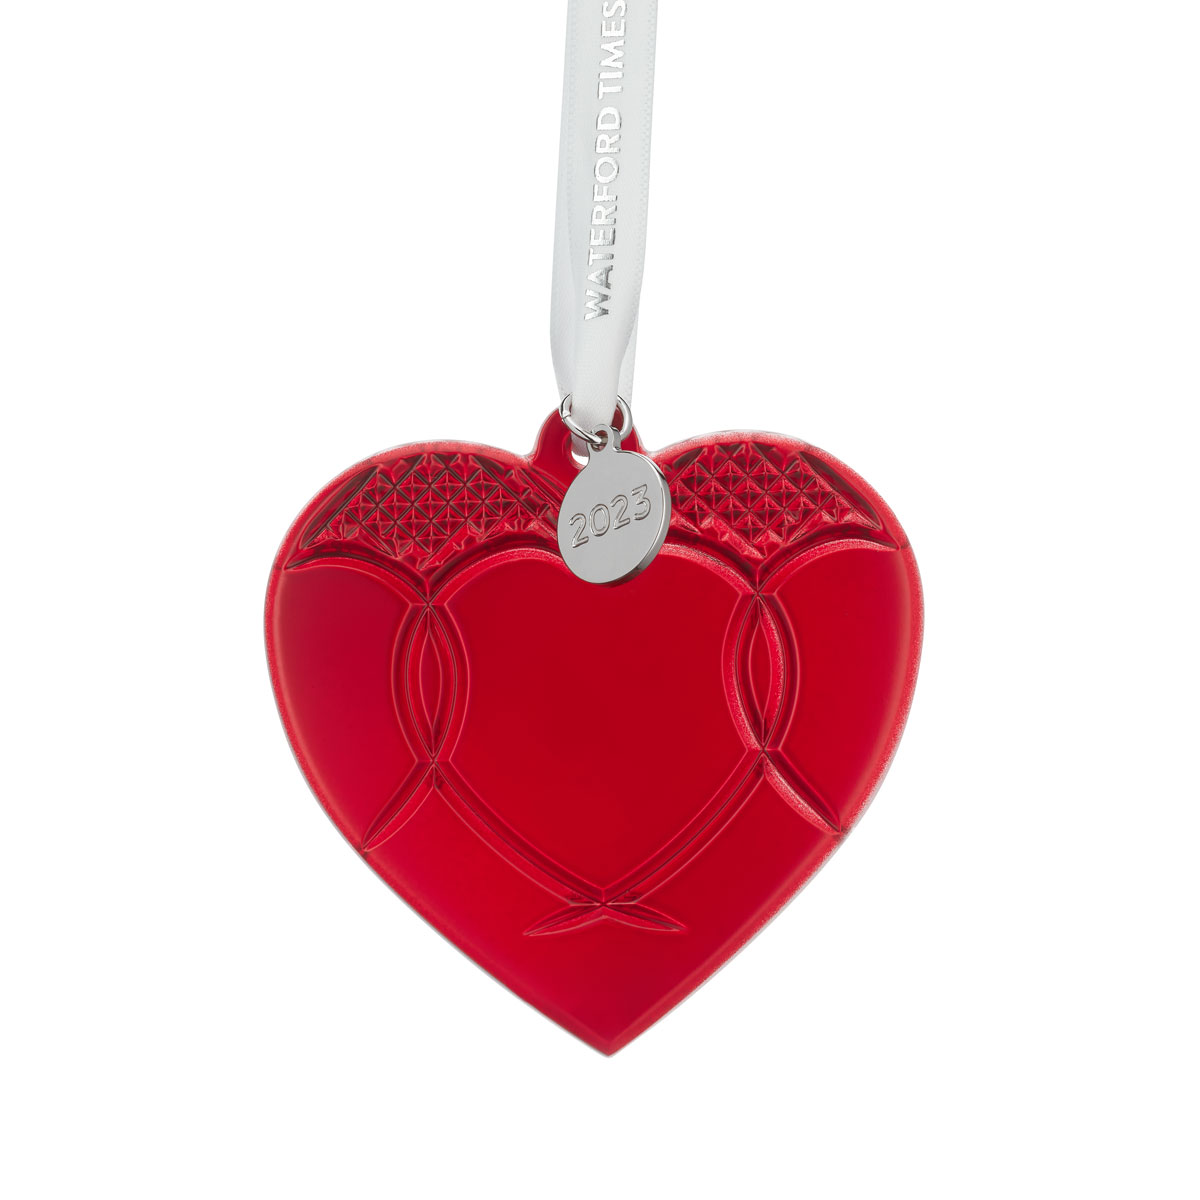 Waterford Crystal Times Square 2023 Dated Heart Ornament Red